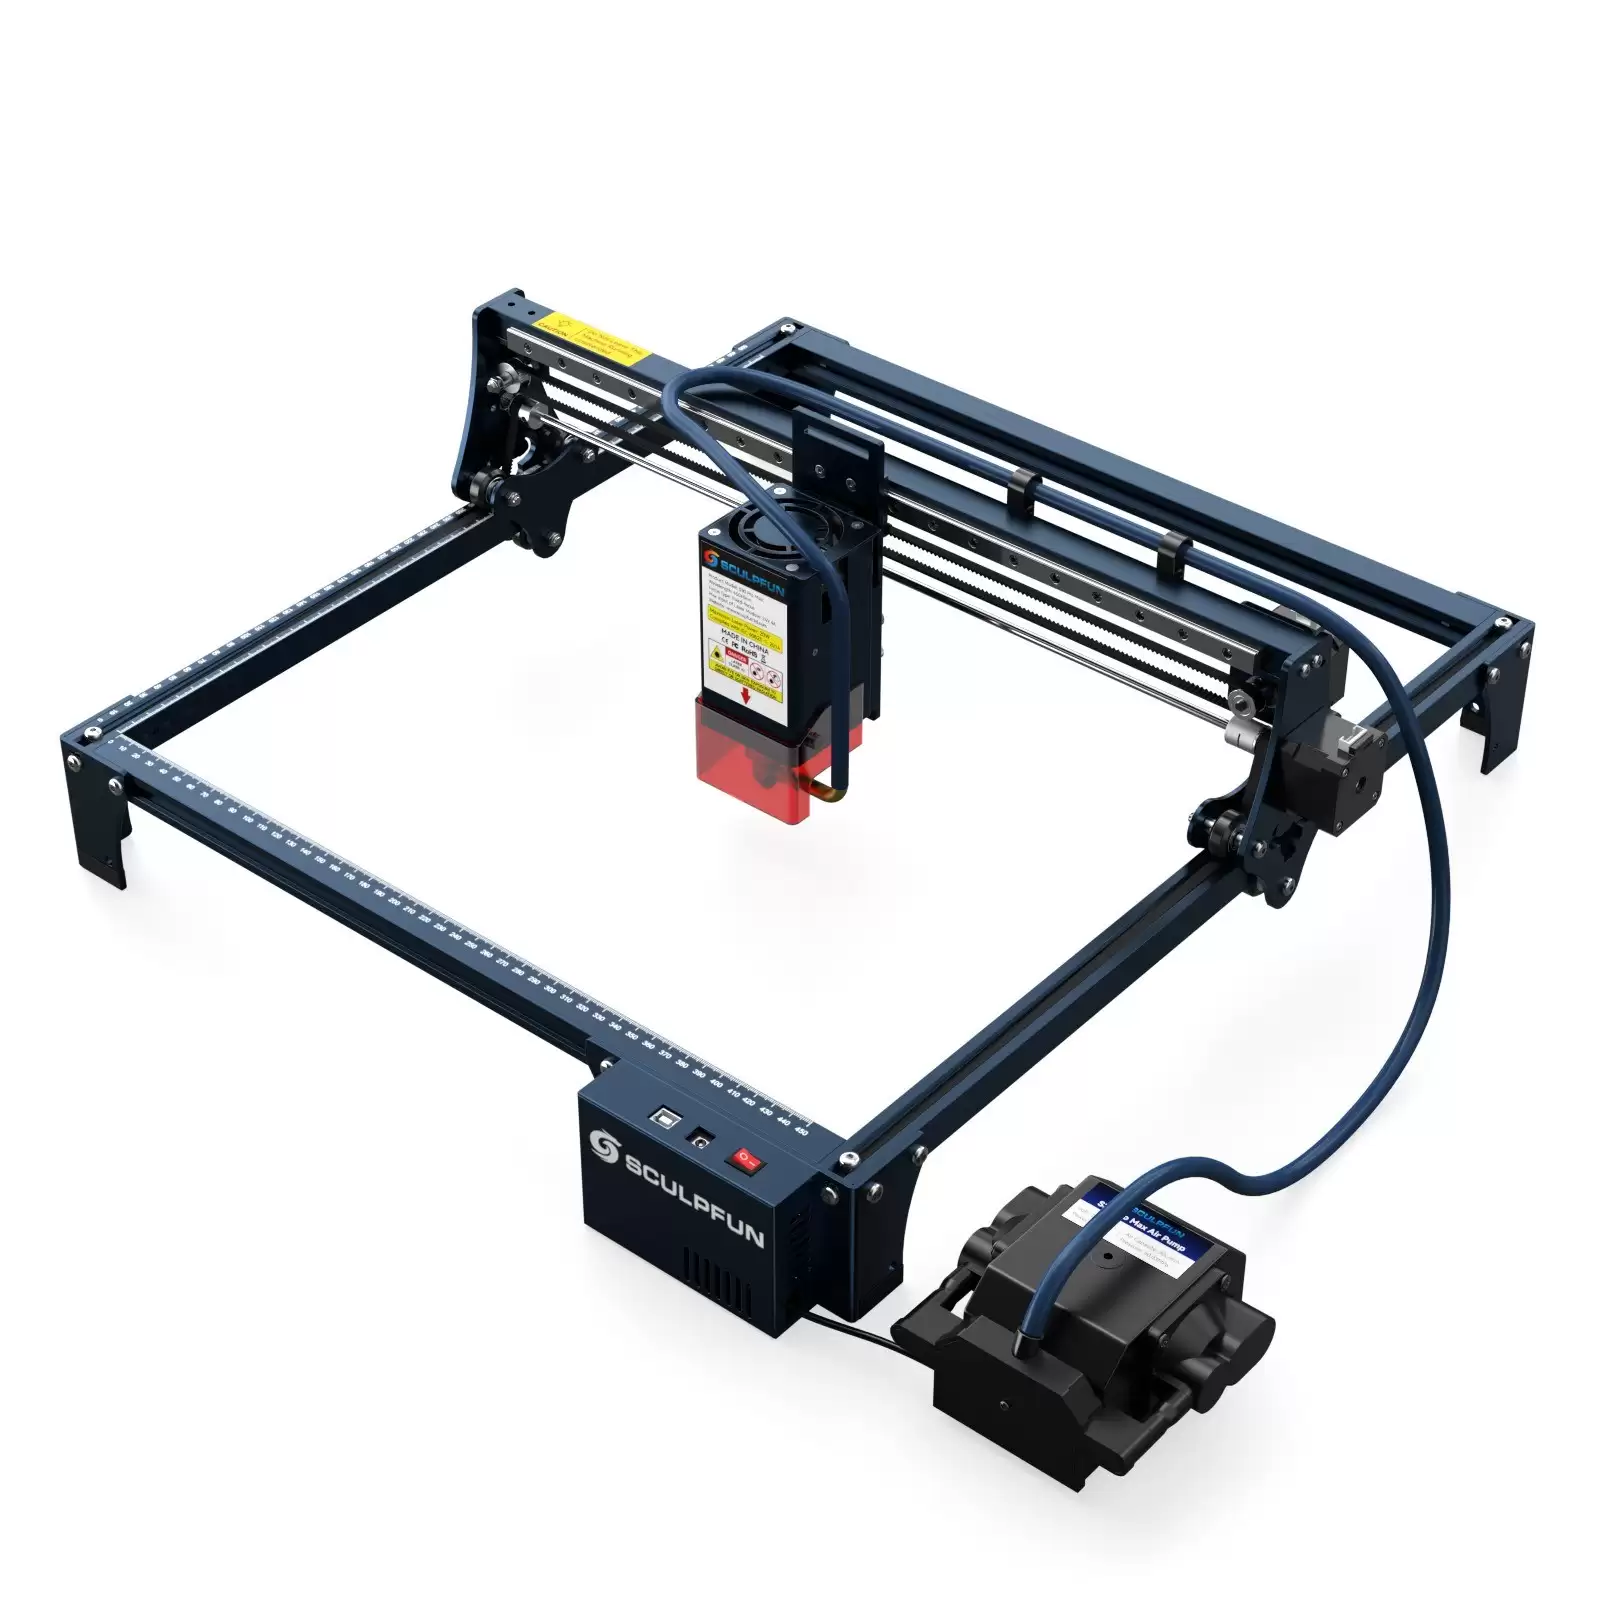 Pay Only $ 919 For Sculpfun Sf-A9 40w Laser Engraver With This Discount Coupon At Cafago